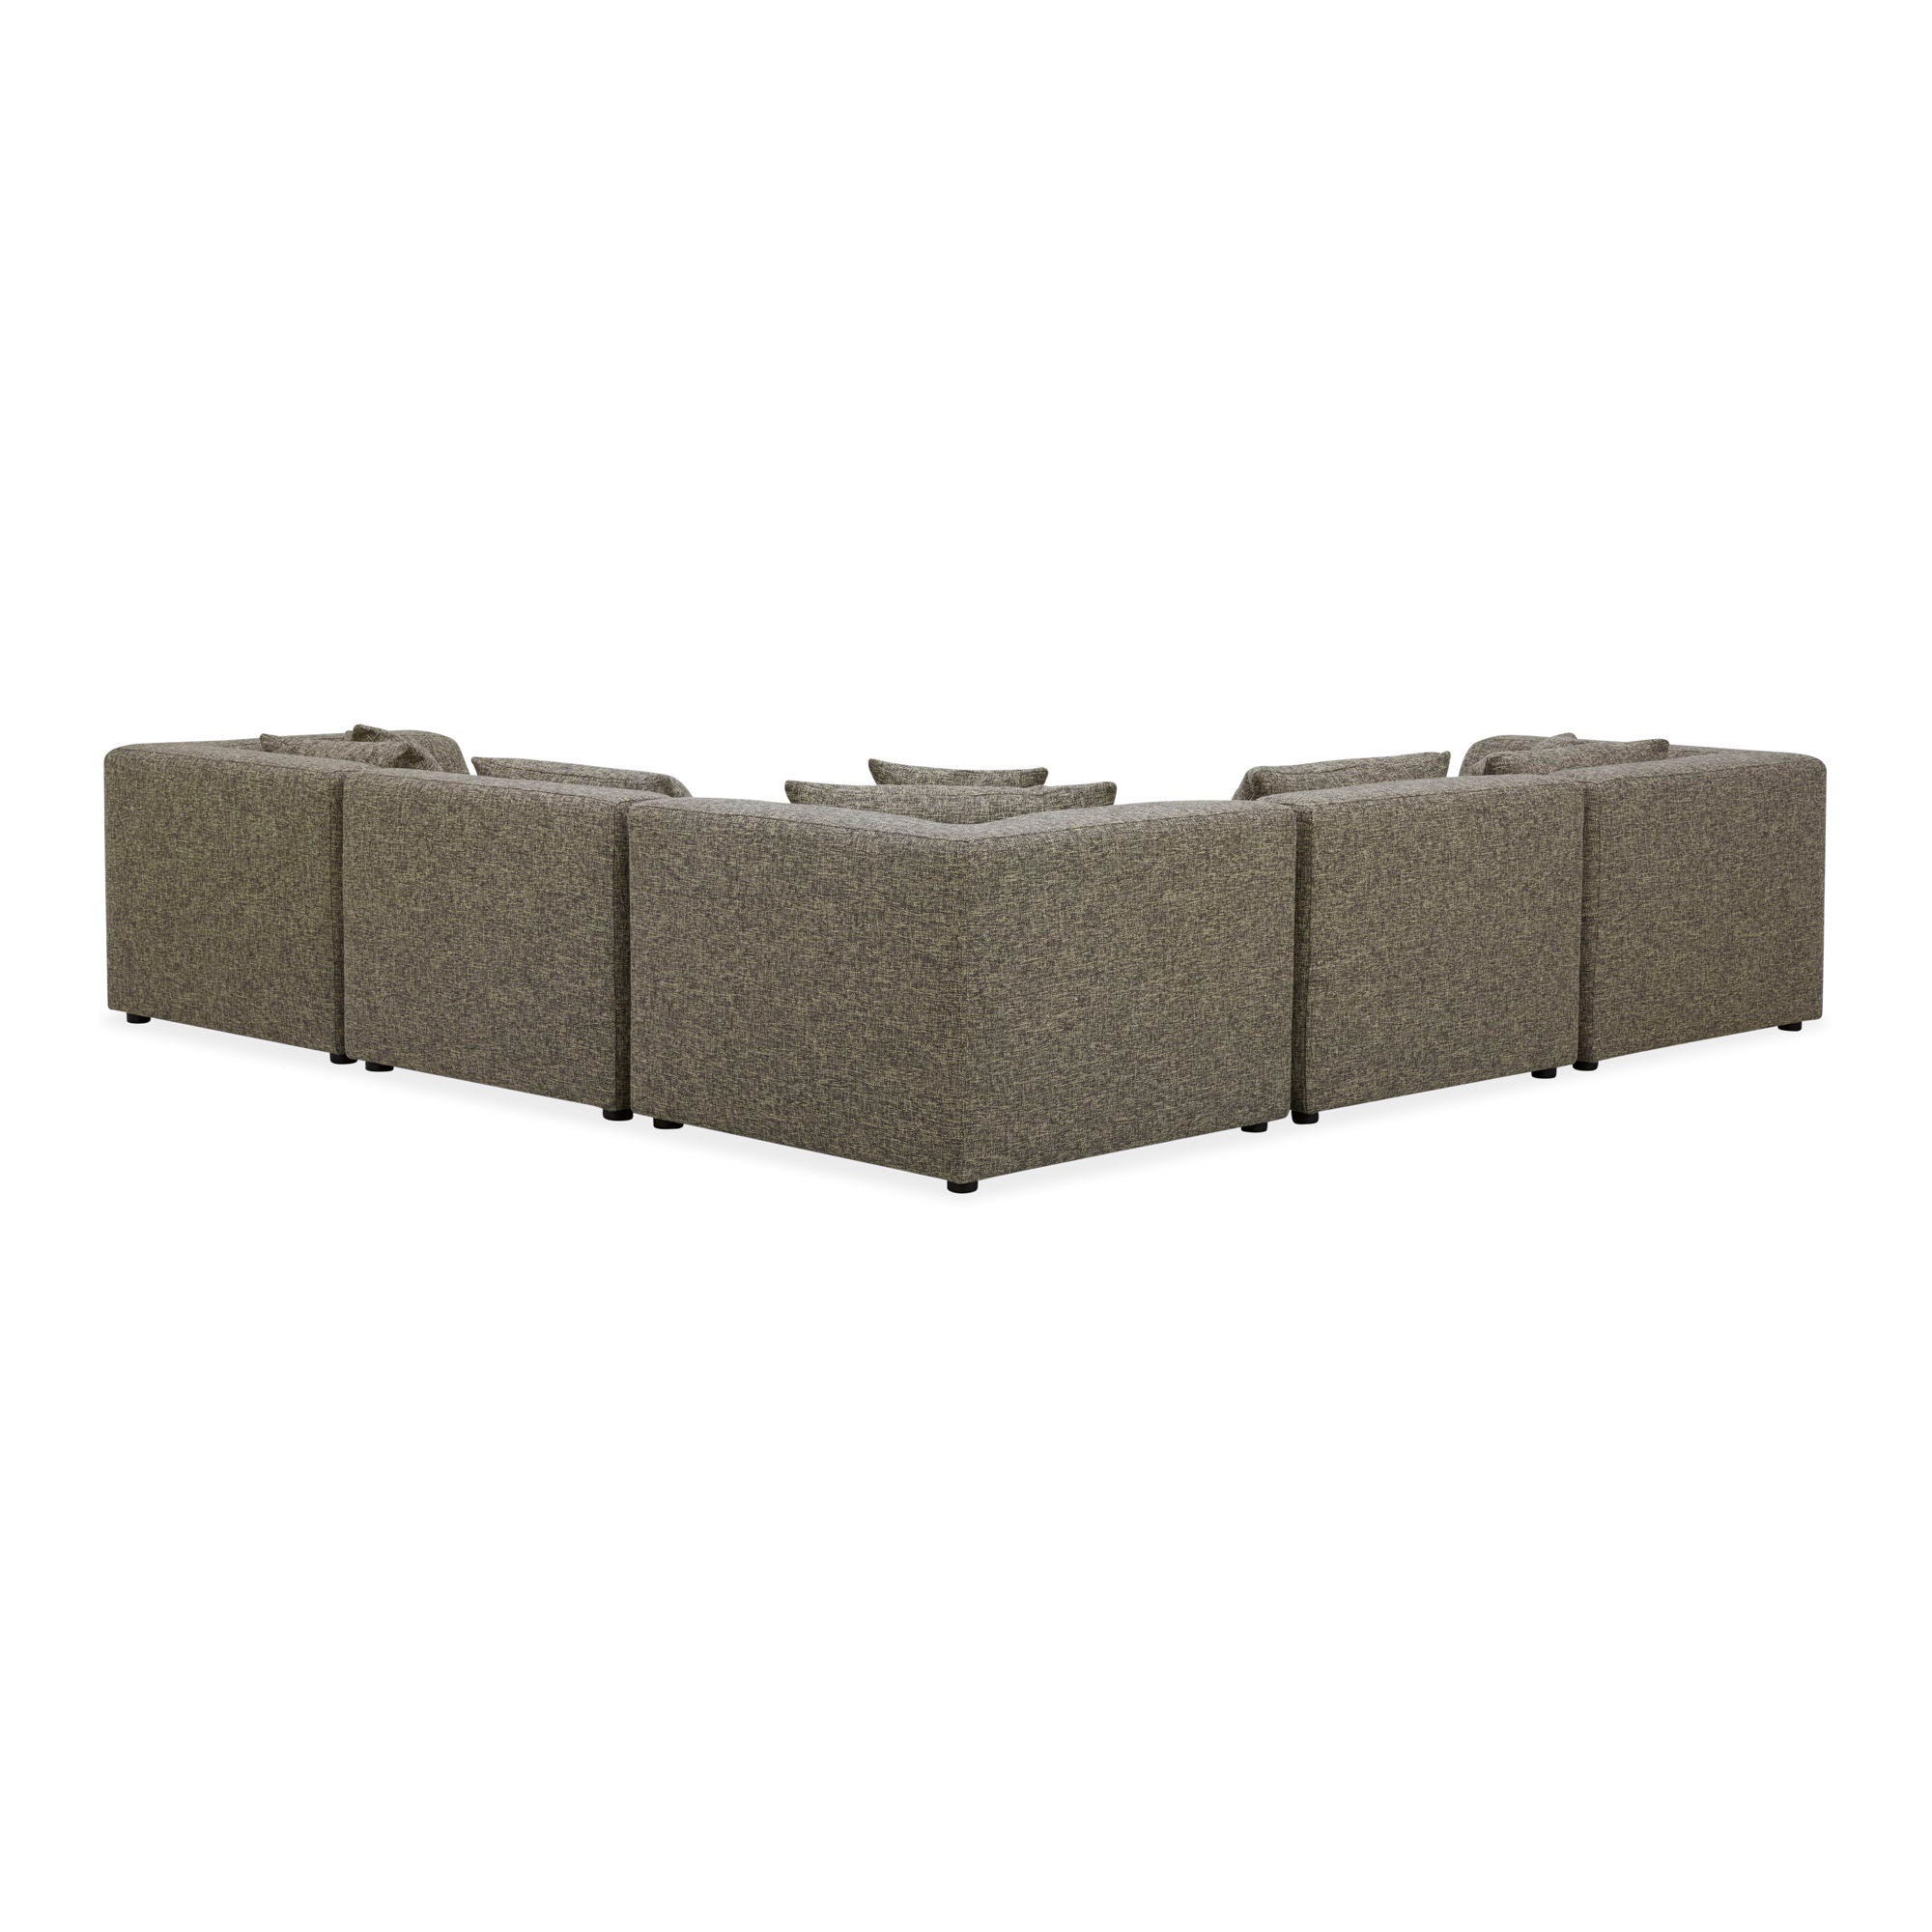 Lowtide - Classic L Modular Sectional - Surie Shadow-Stationary Sectionals-American Furniture Outlet